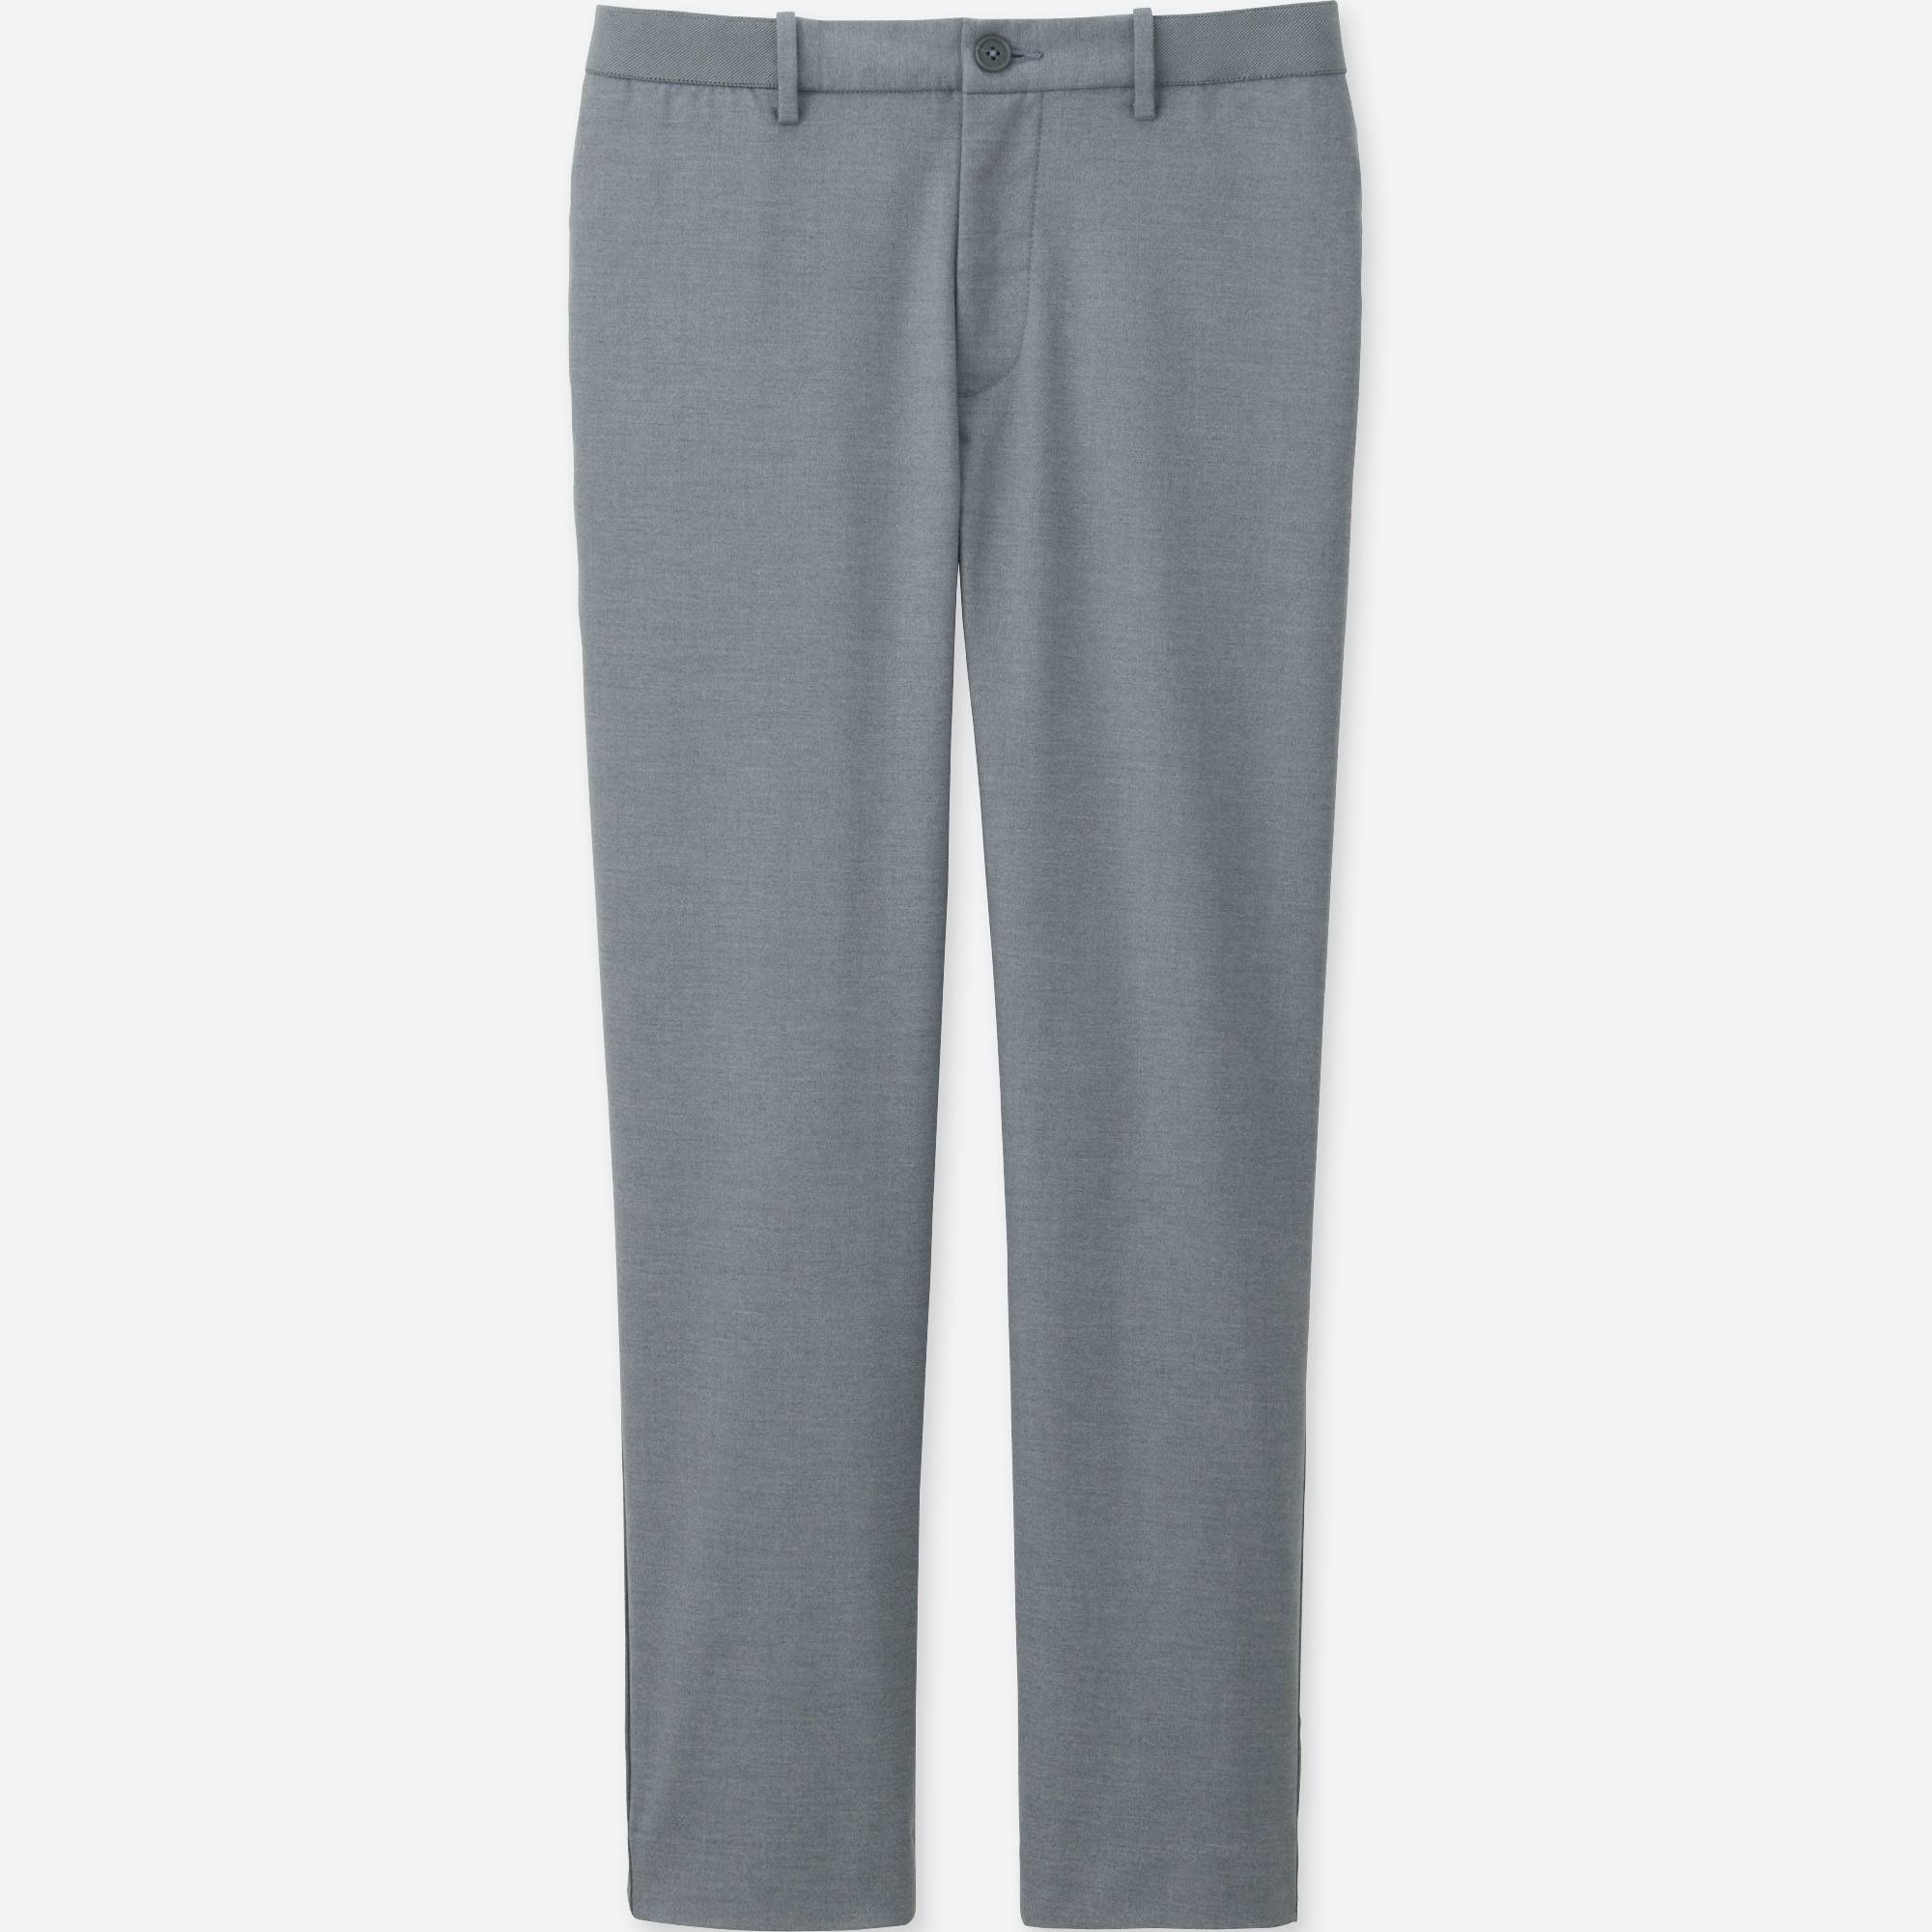 men relaxed ankle pants (cotton), gray, small XOOHBFP